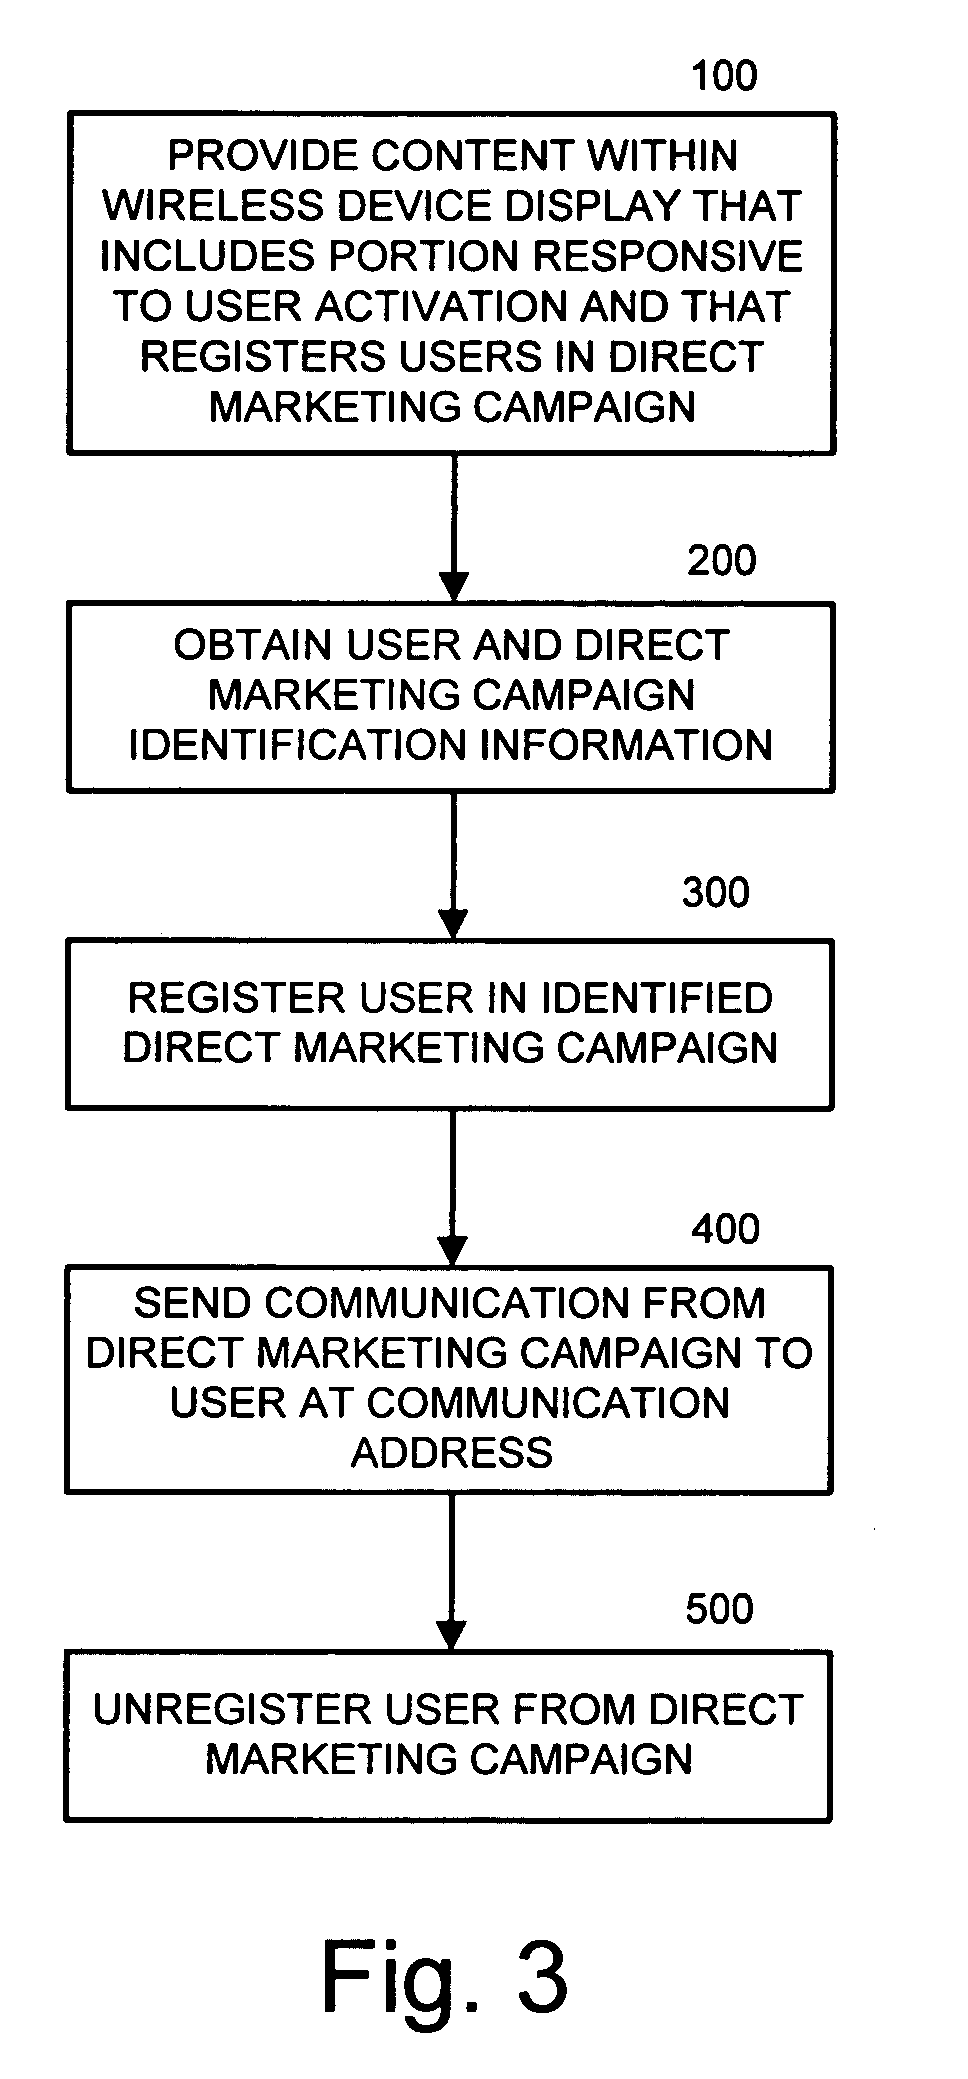 Systems, methods, and computer program products for registering wireless device users in direct marketing campaigns